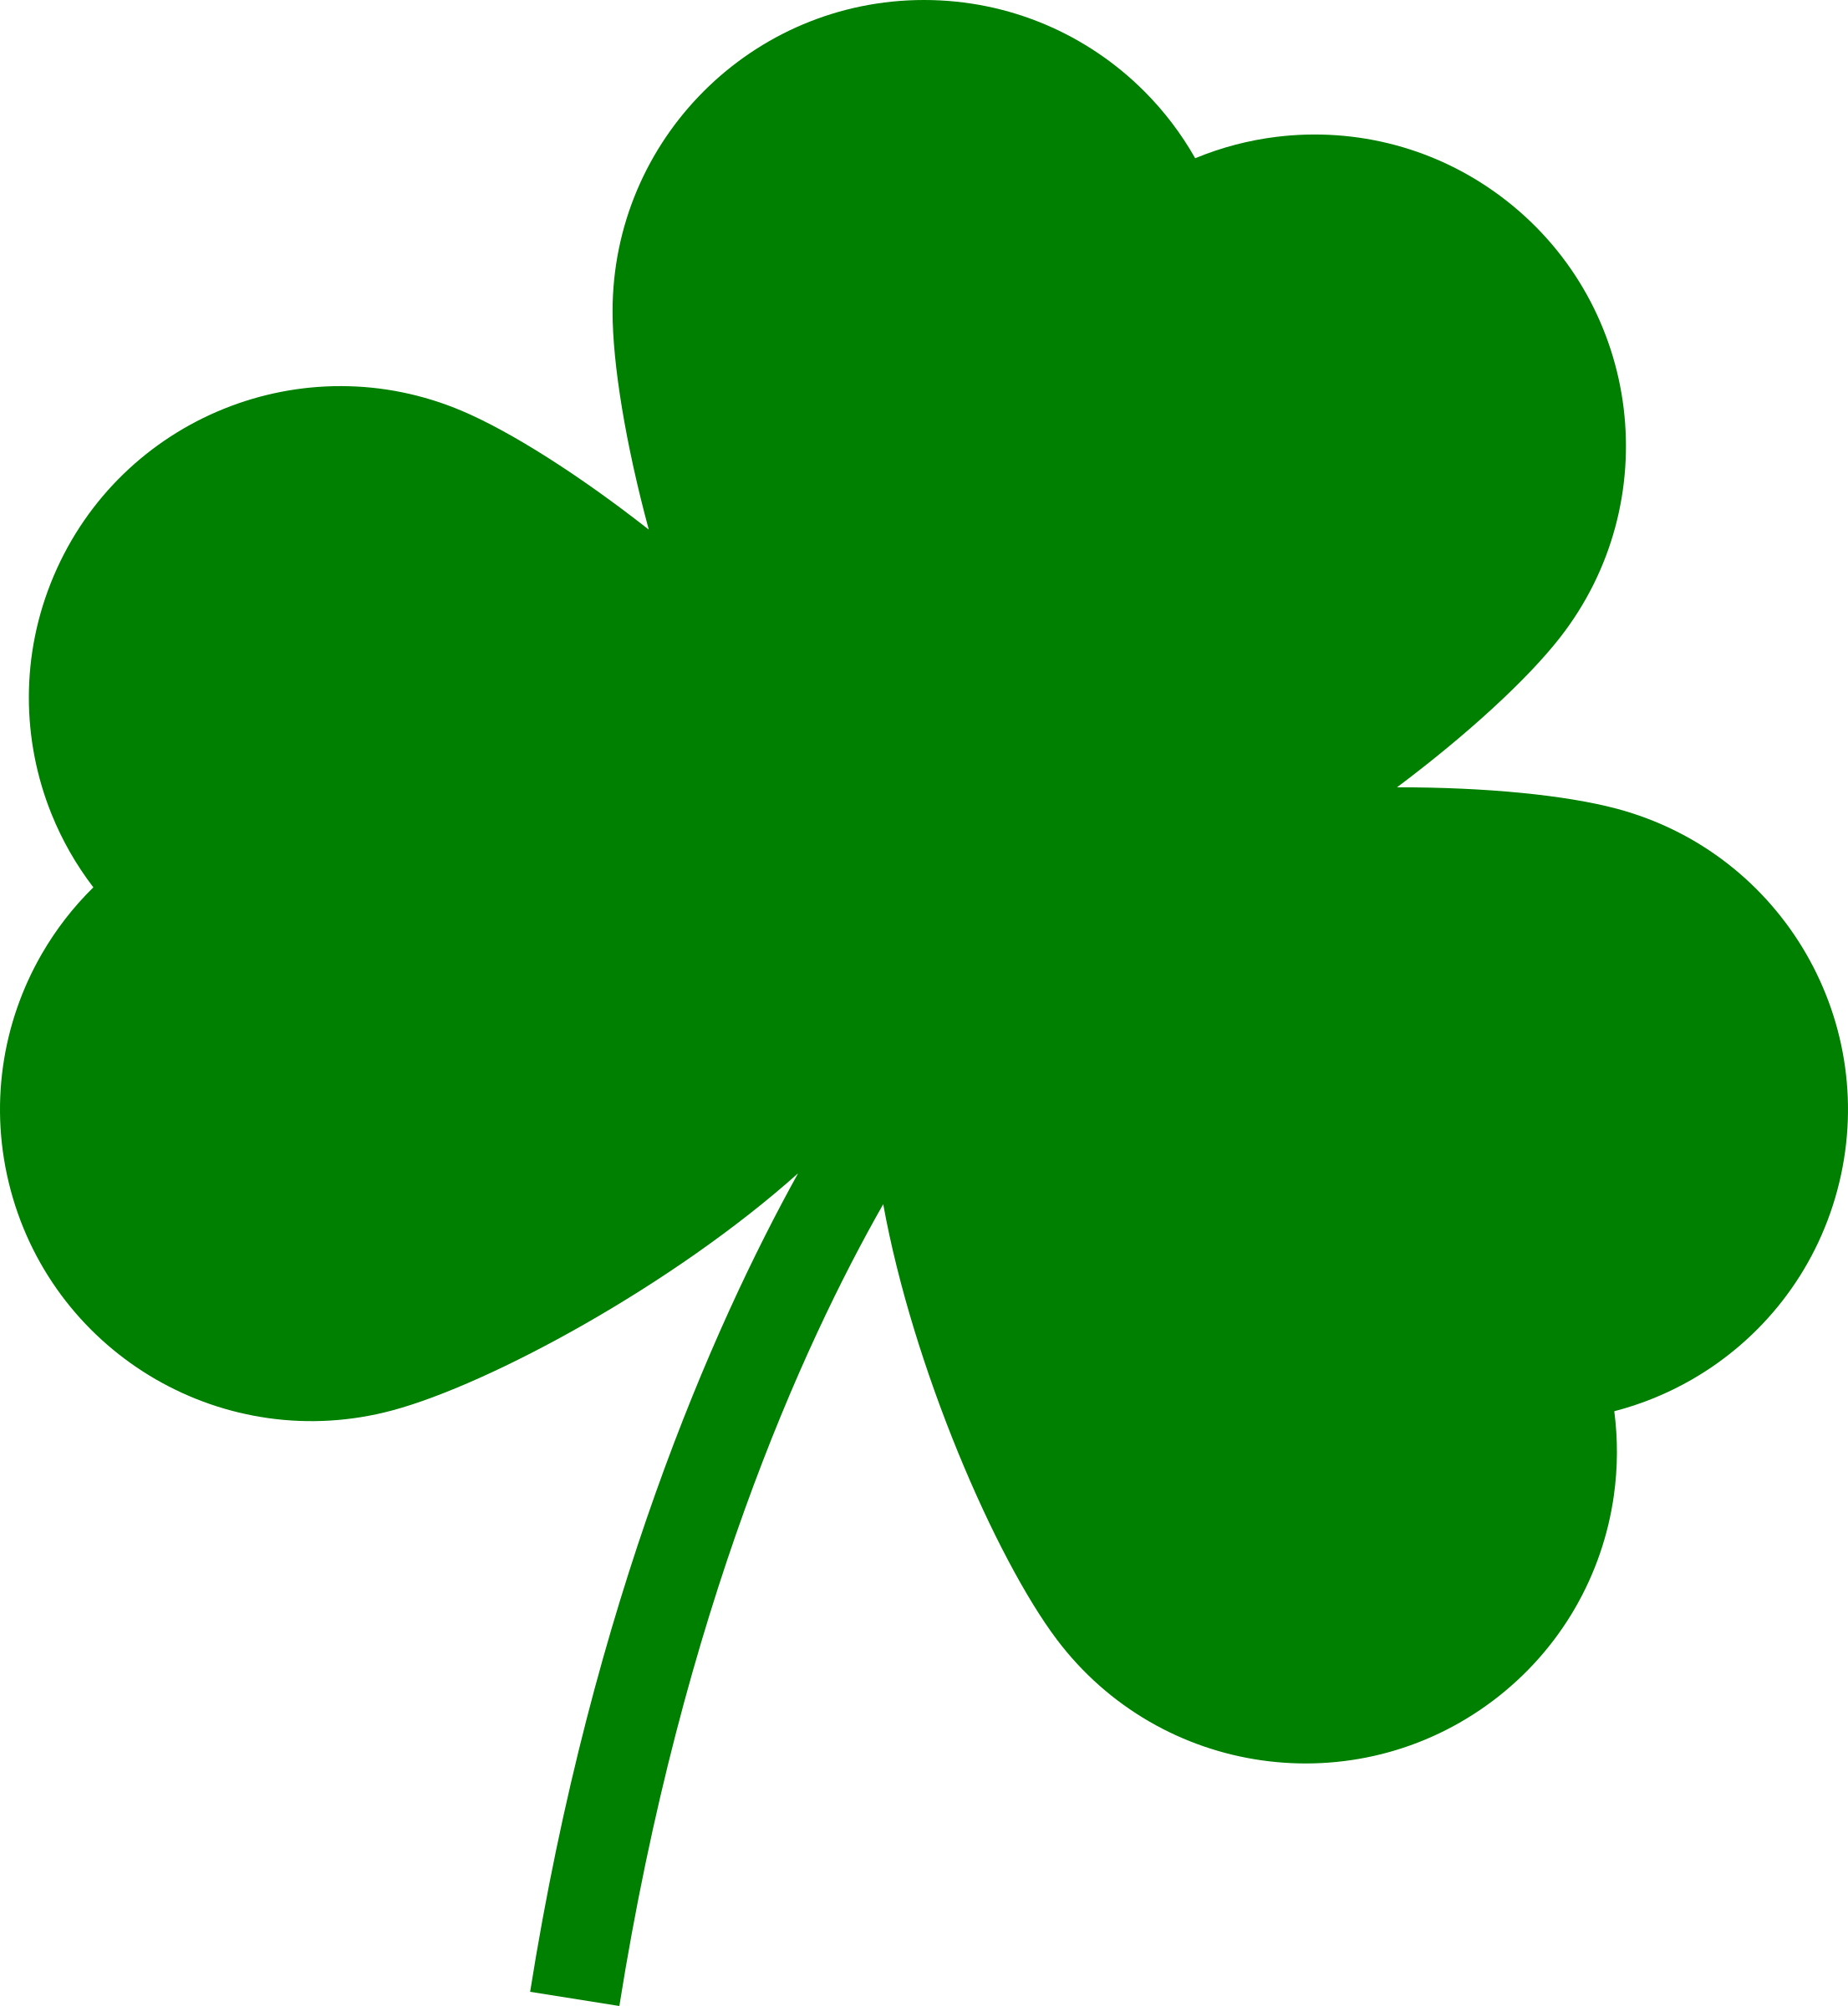 Clover PNG - 16155